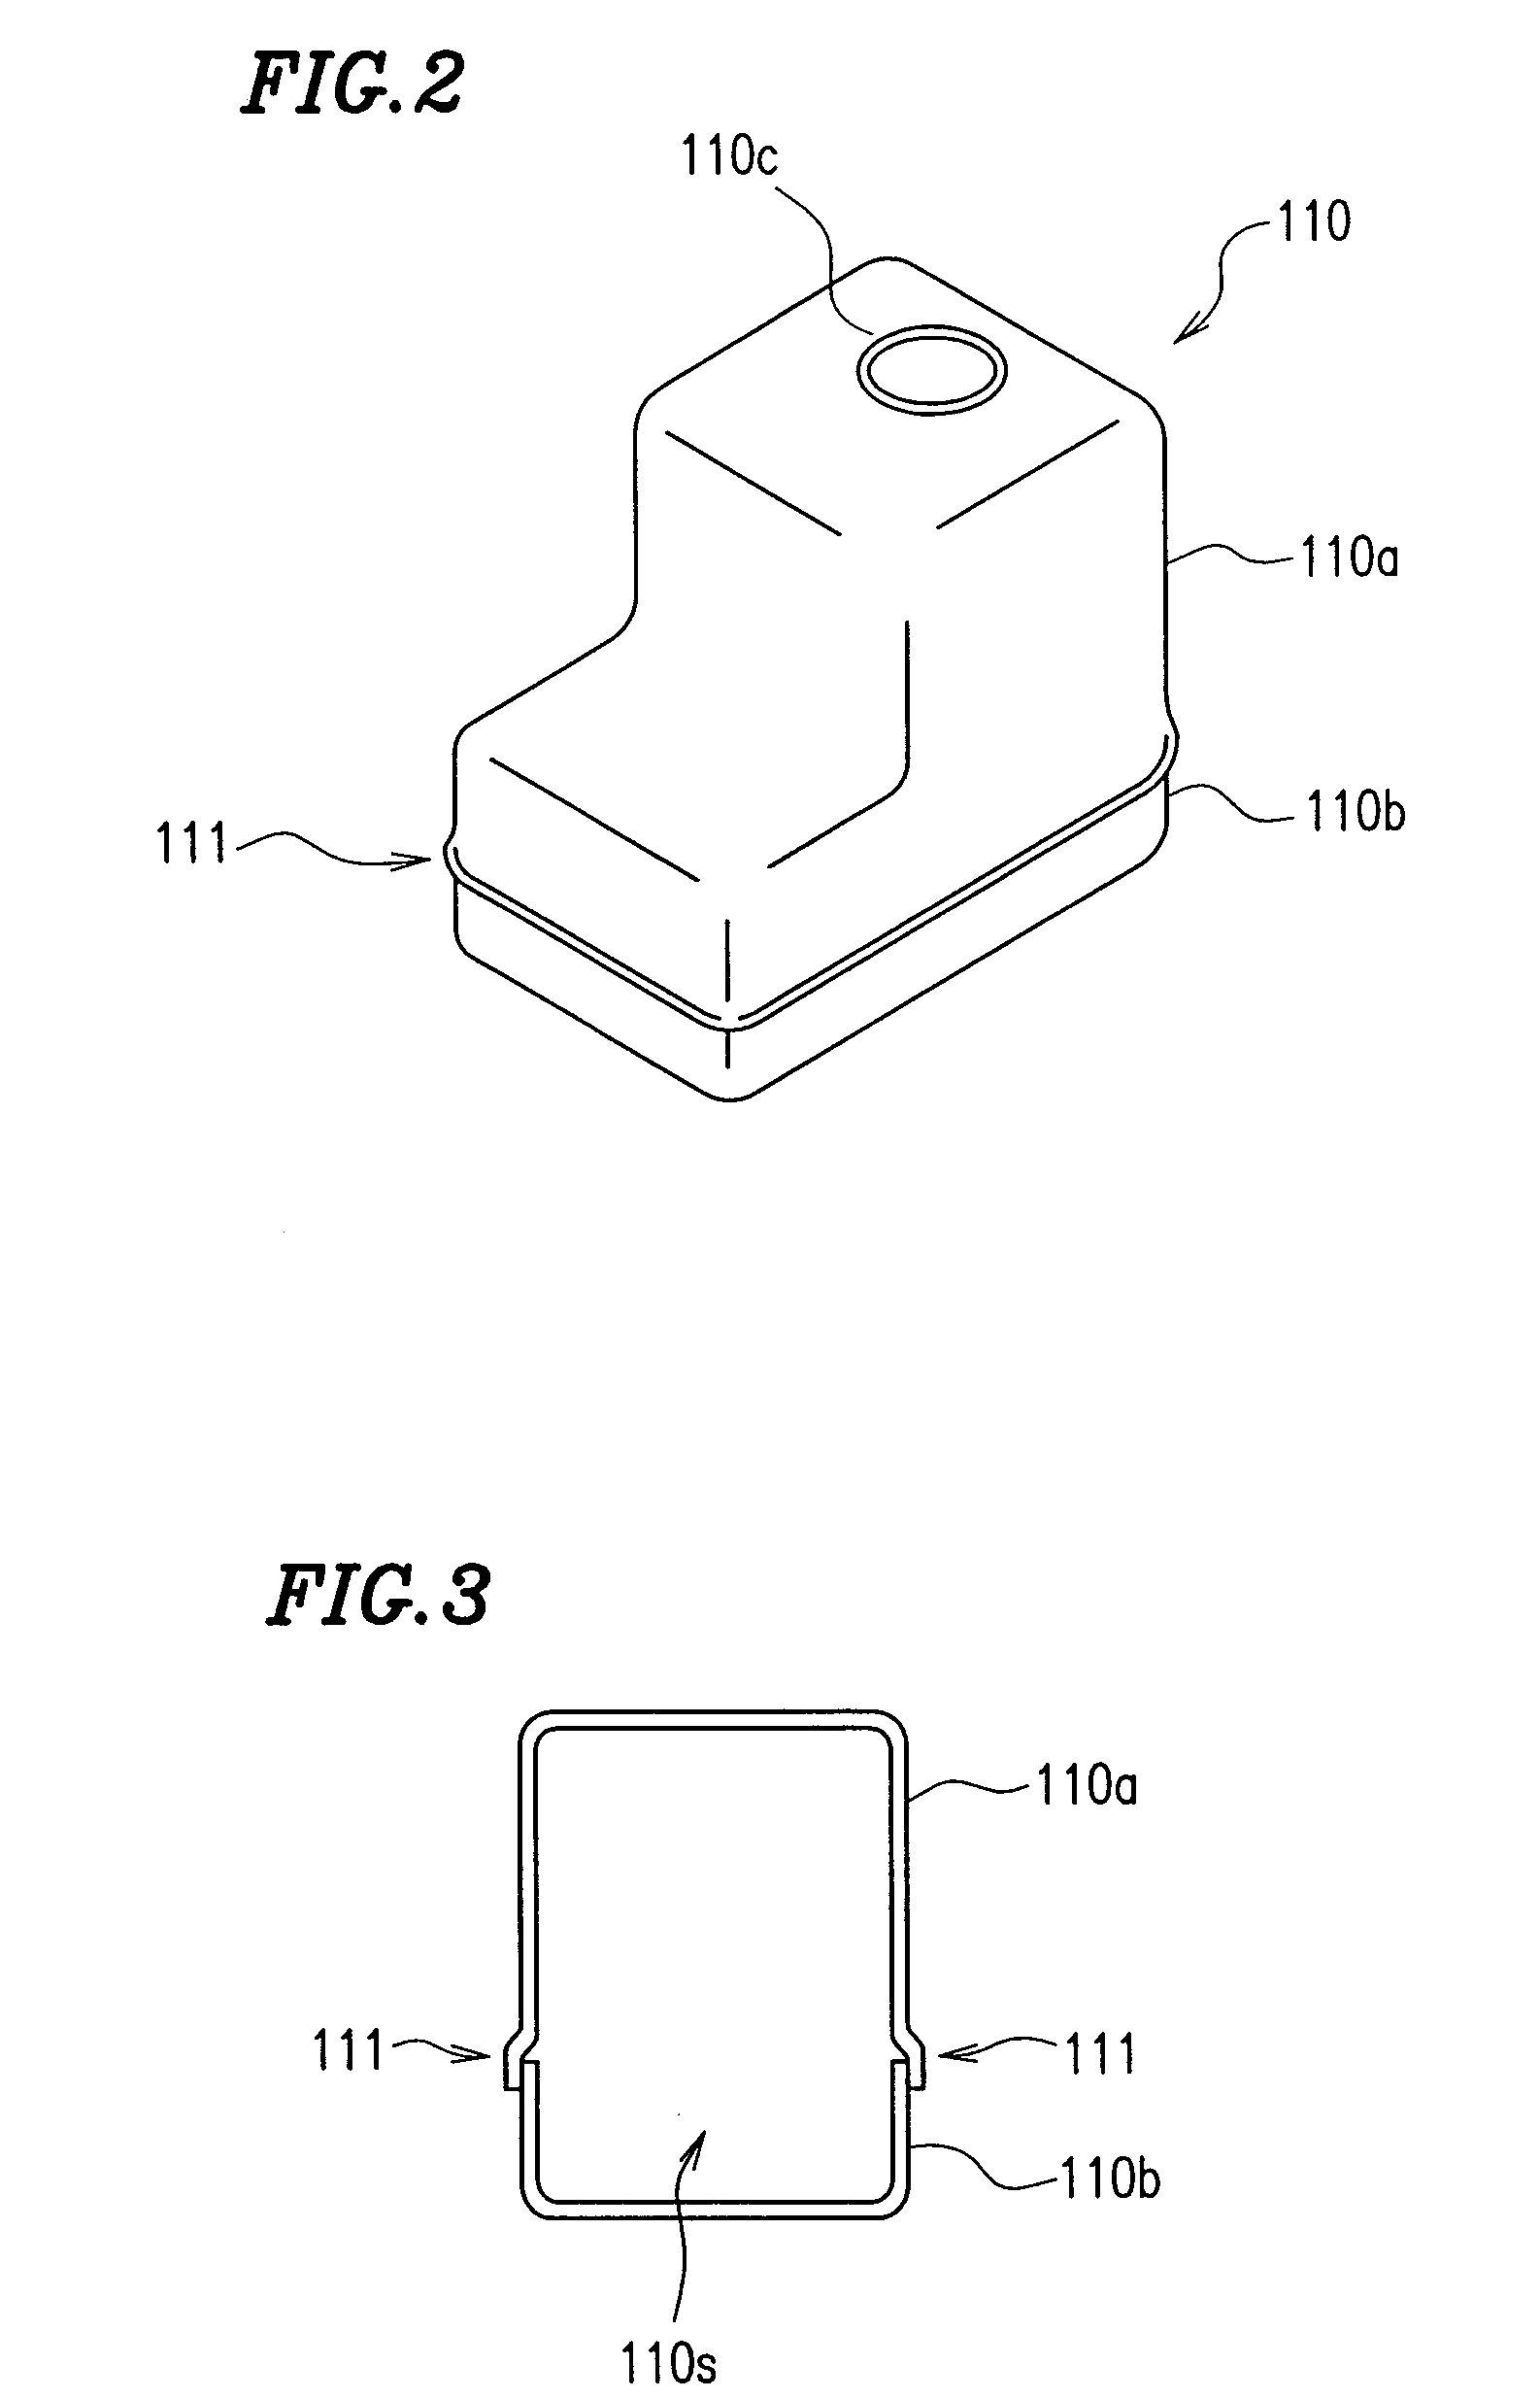 Cast part made of aluminum alloy, fuel tank, and production method for the same